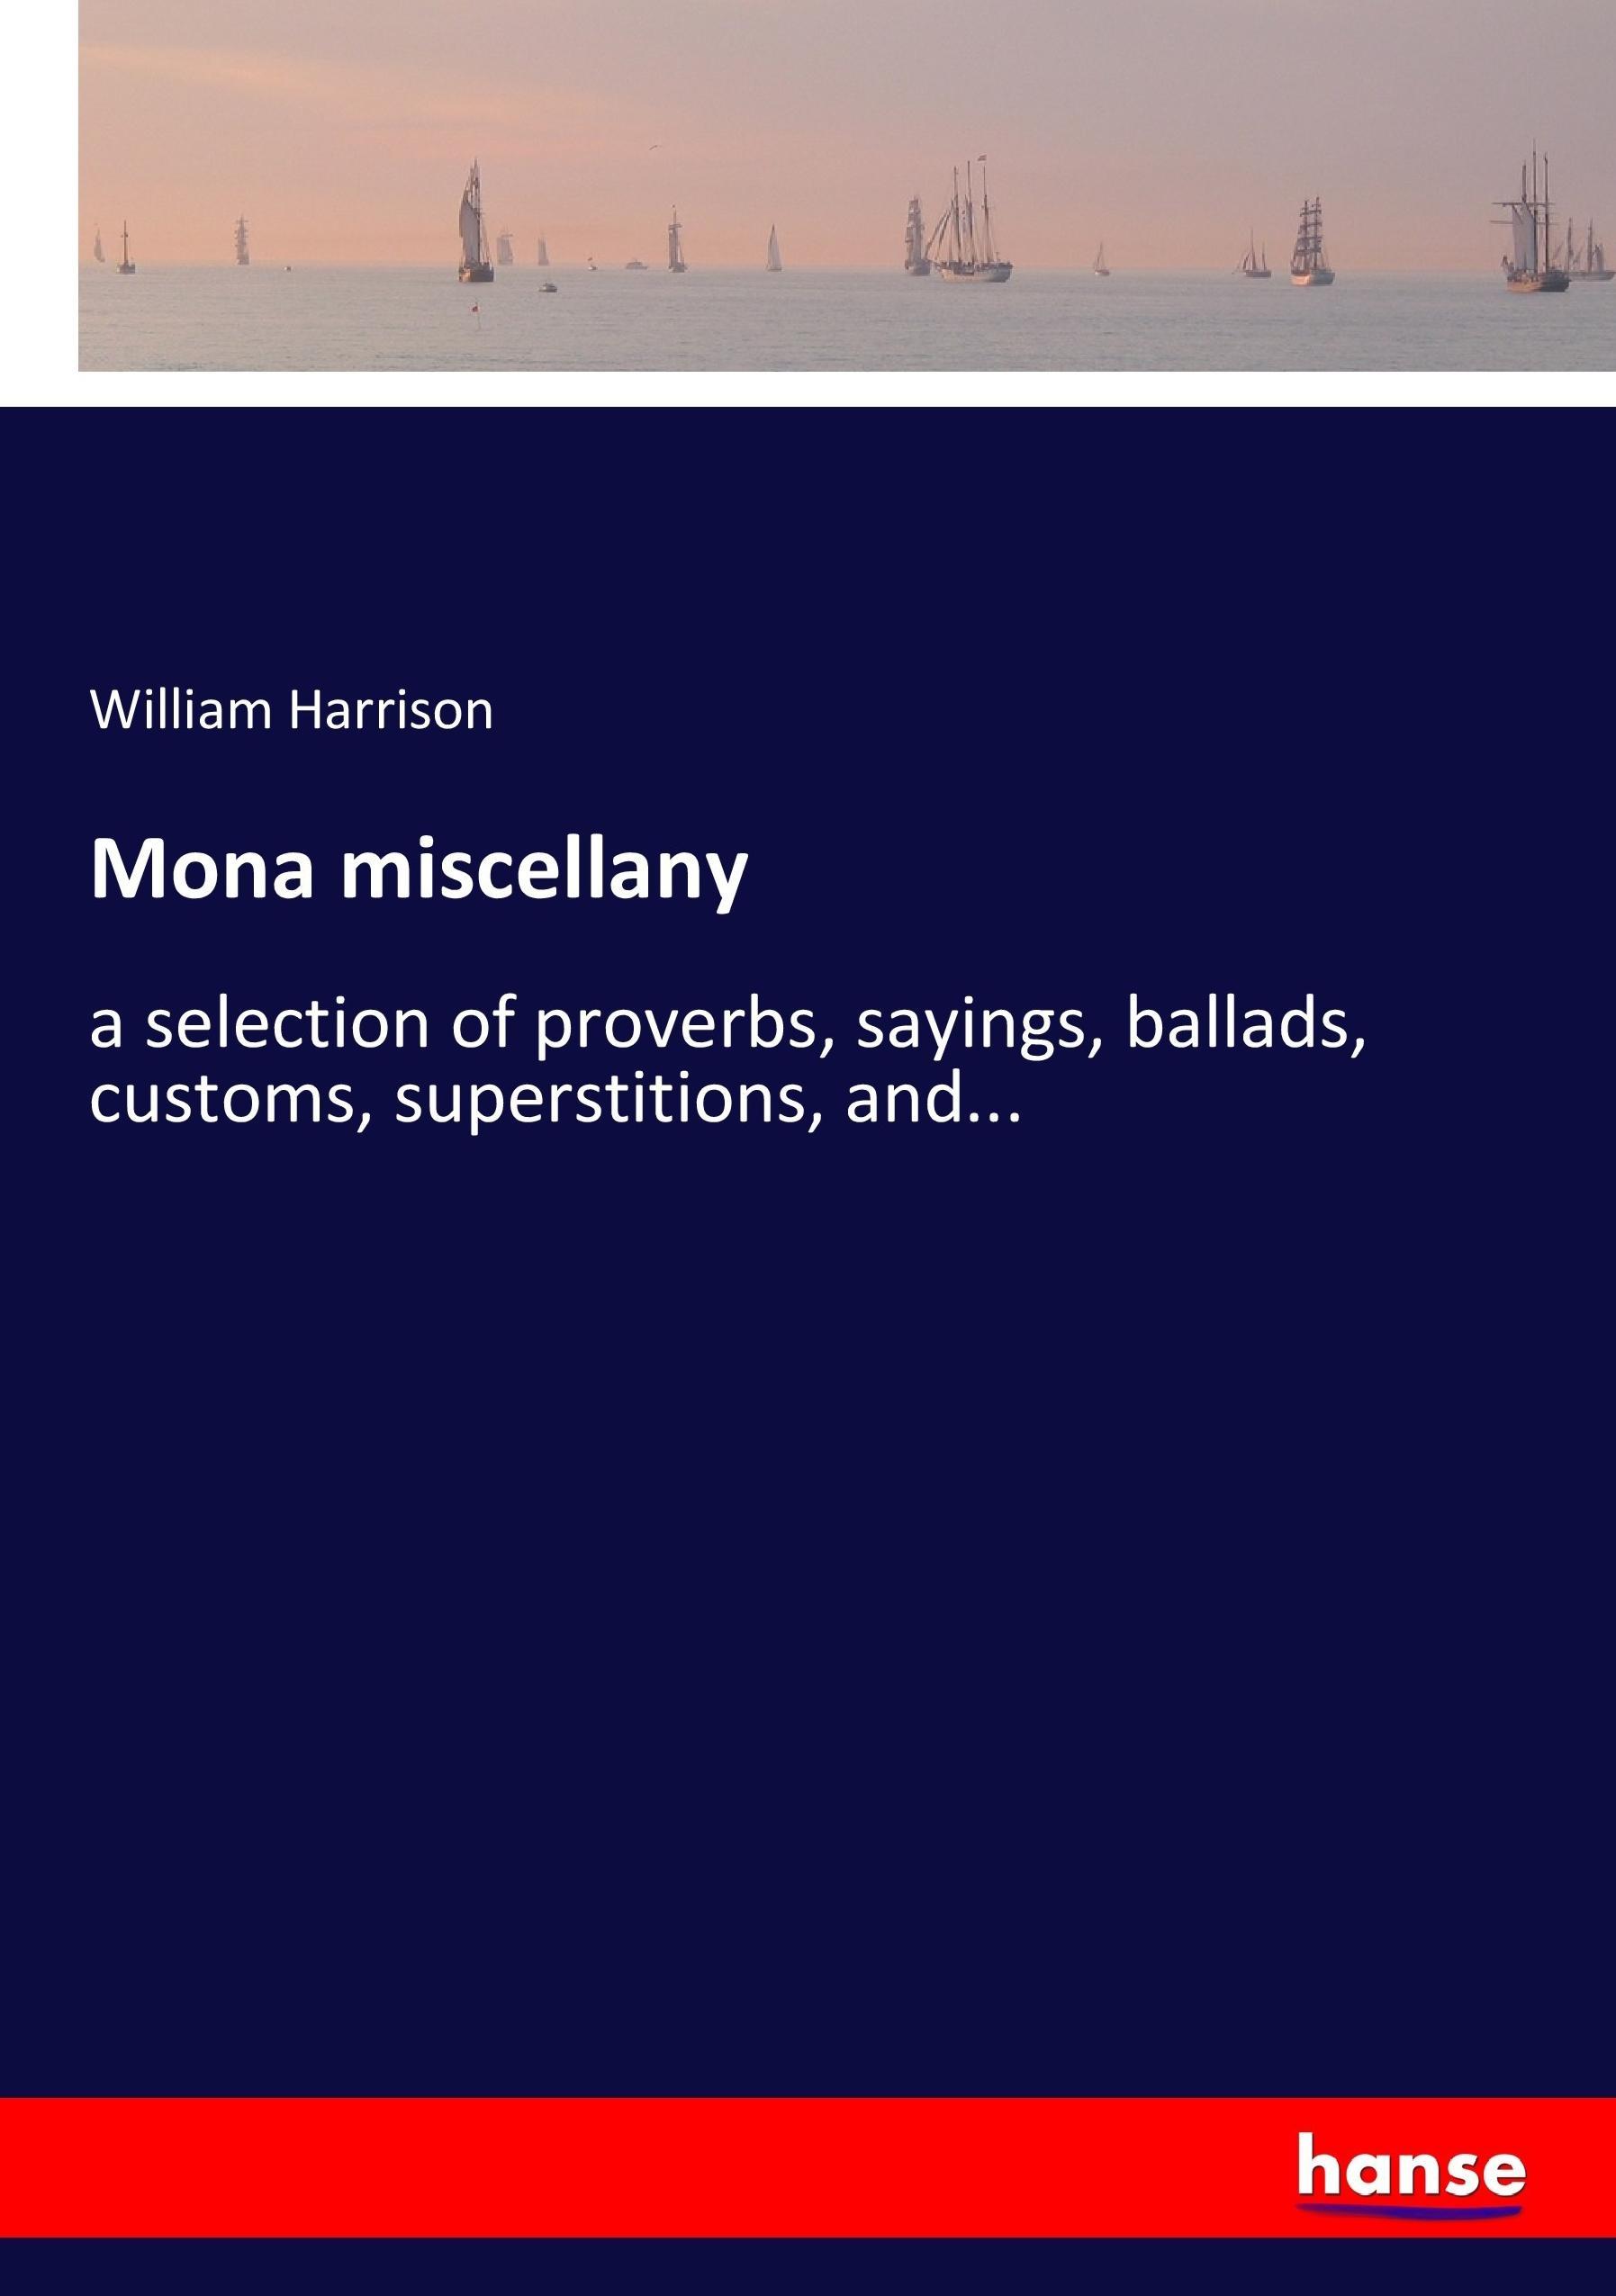 Mona miscellany | a selection of proverbs, sayings, ballads, customs, superstitions, and... | William Harrison | Taschenbuch | Paperback | 320 S. | Englisch | 2017 | hansebooks | EAN 9783744780513 - Harrison, William